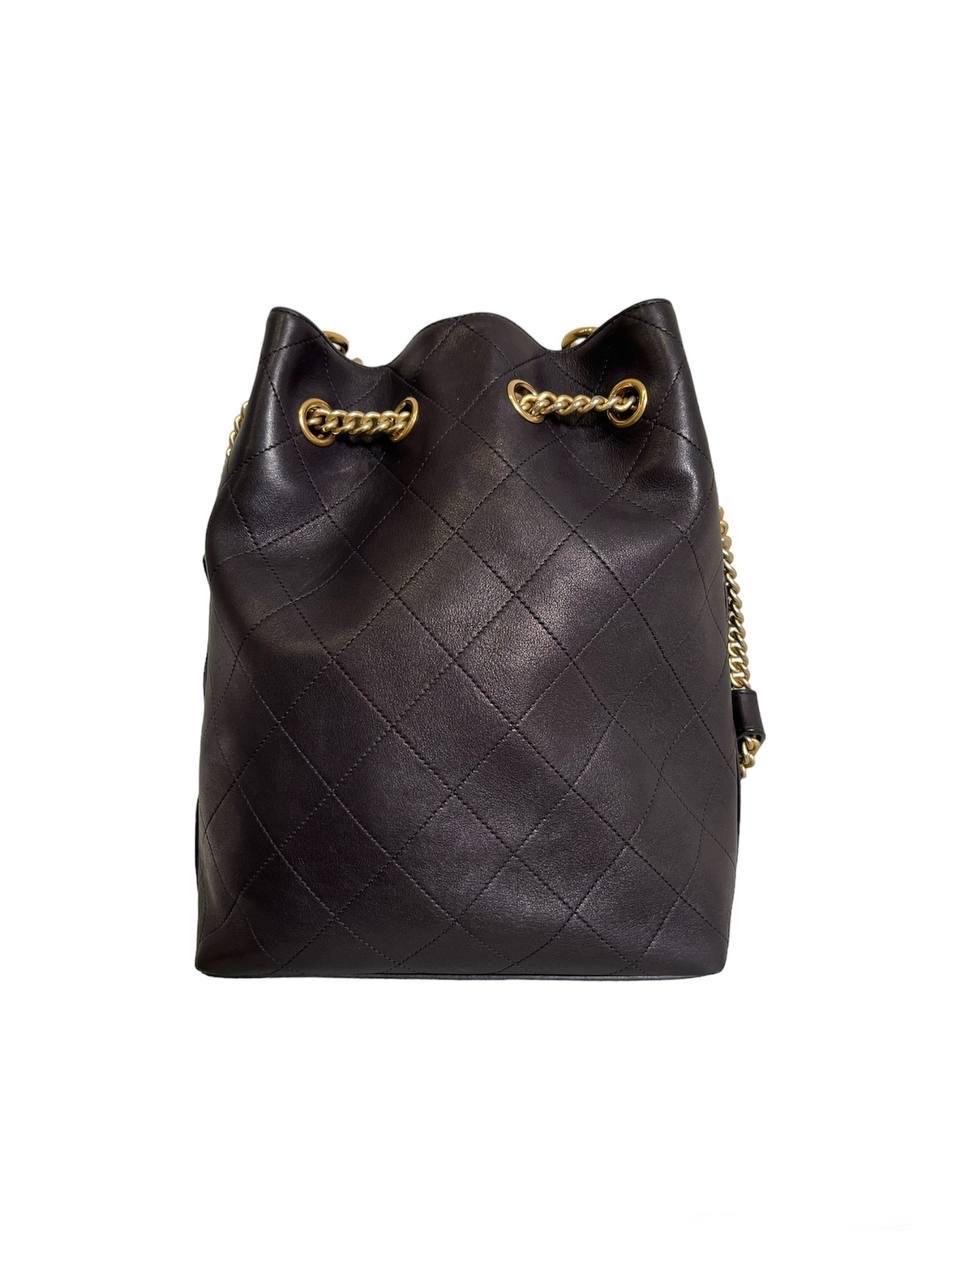 Chanel signed bucket bag, made of black quilted leather and golden hardware. Equipped with an internal magnetic button closure. Equipped with a chain handle and an adjustable sliding shoulder strap made of leather and large chain link, with 